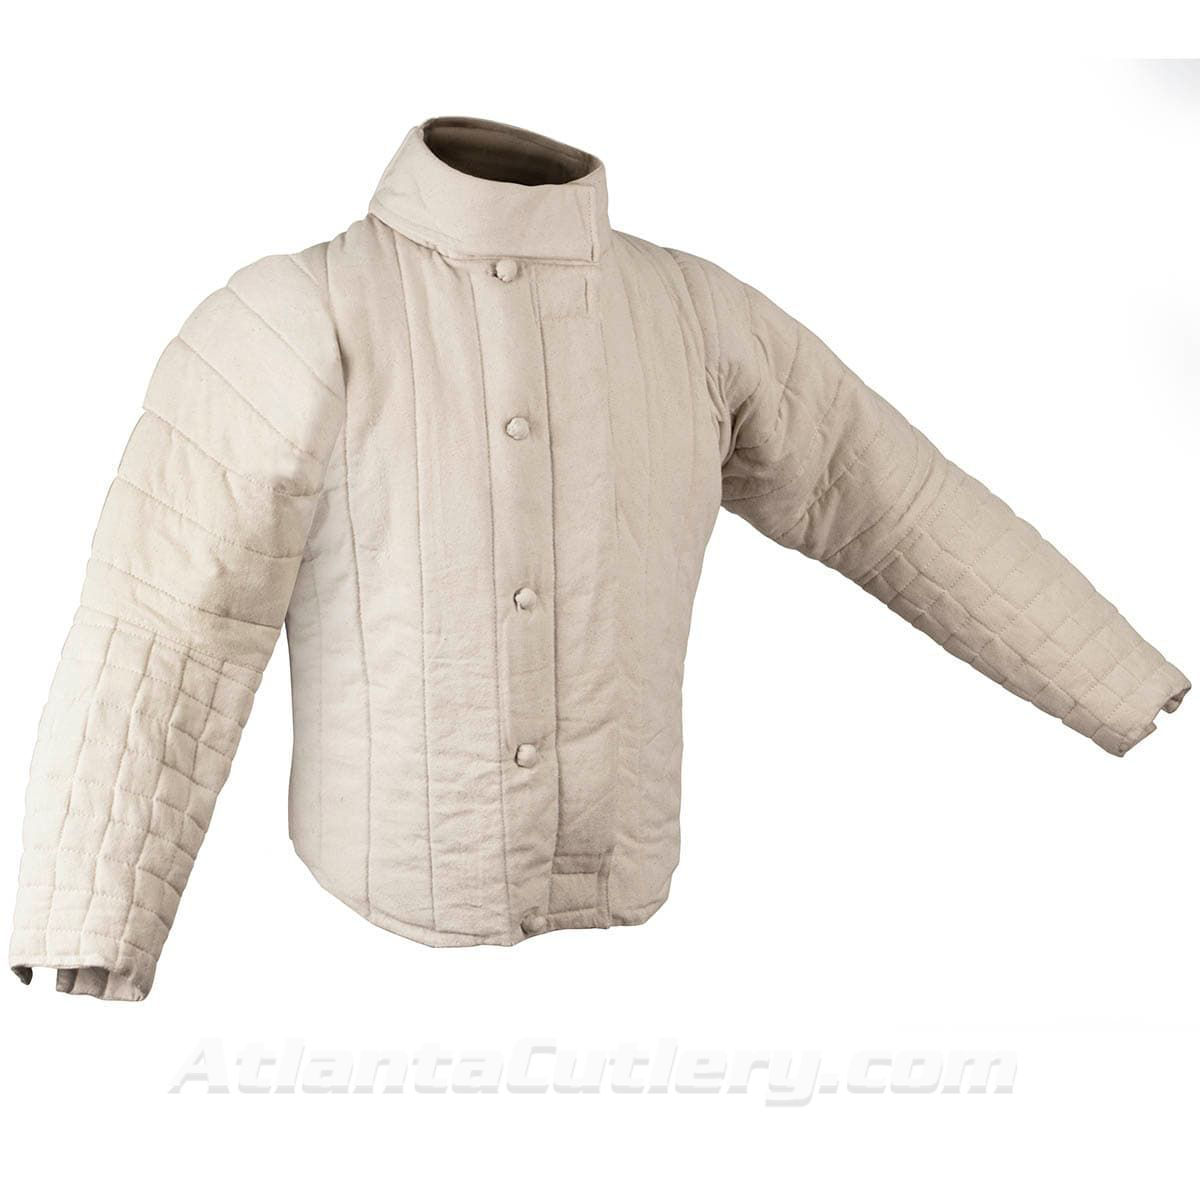 Canvas grade cotton fencing jacket with thick padding and Velcro closure